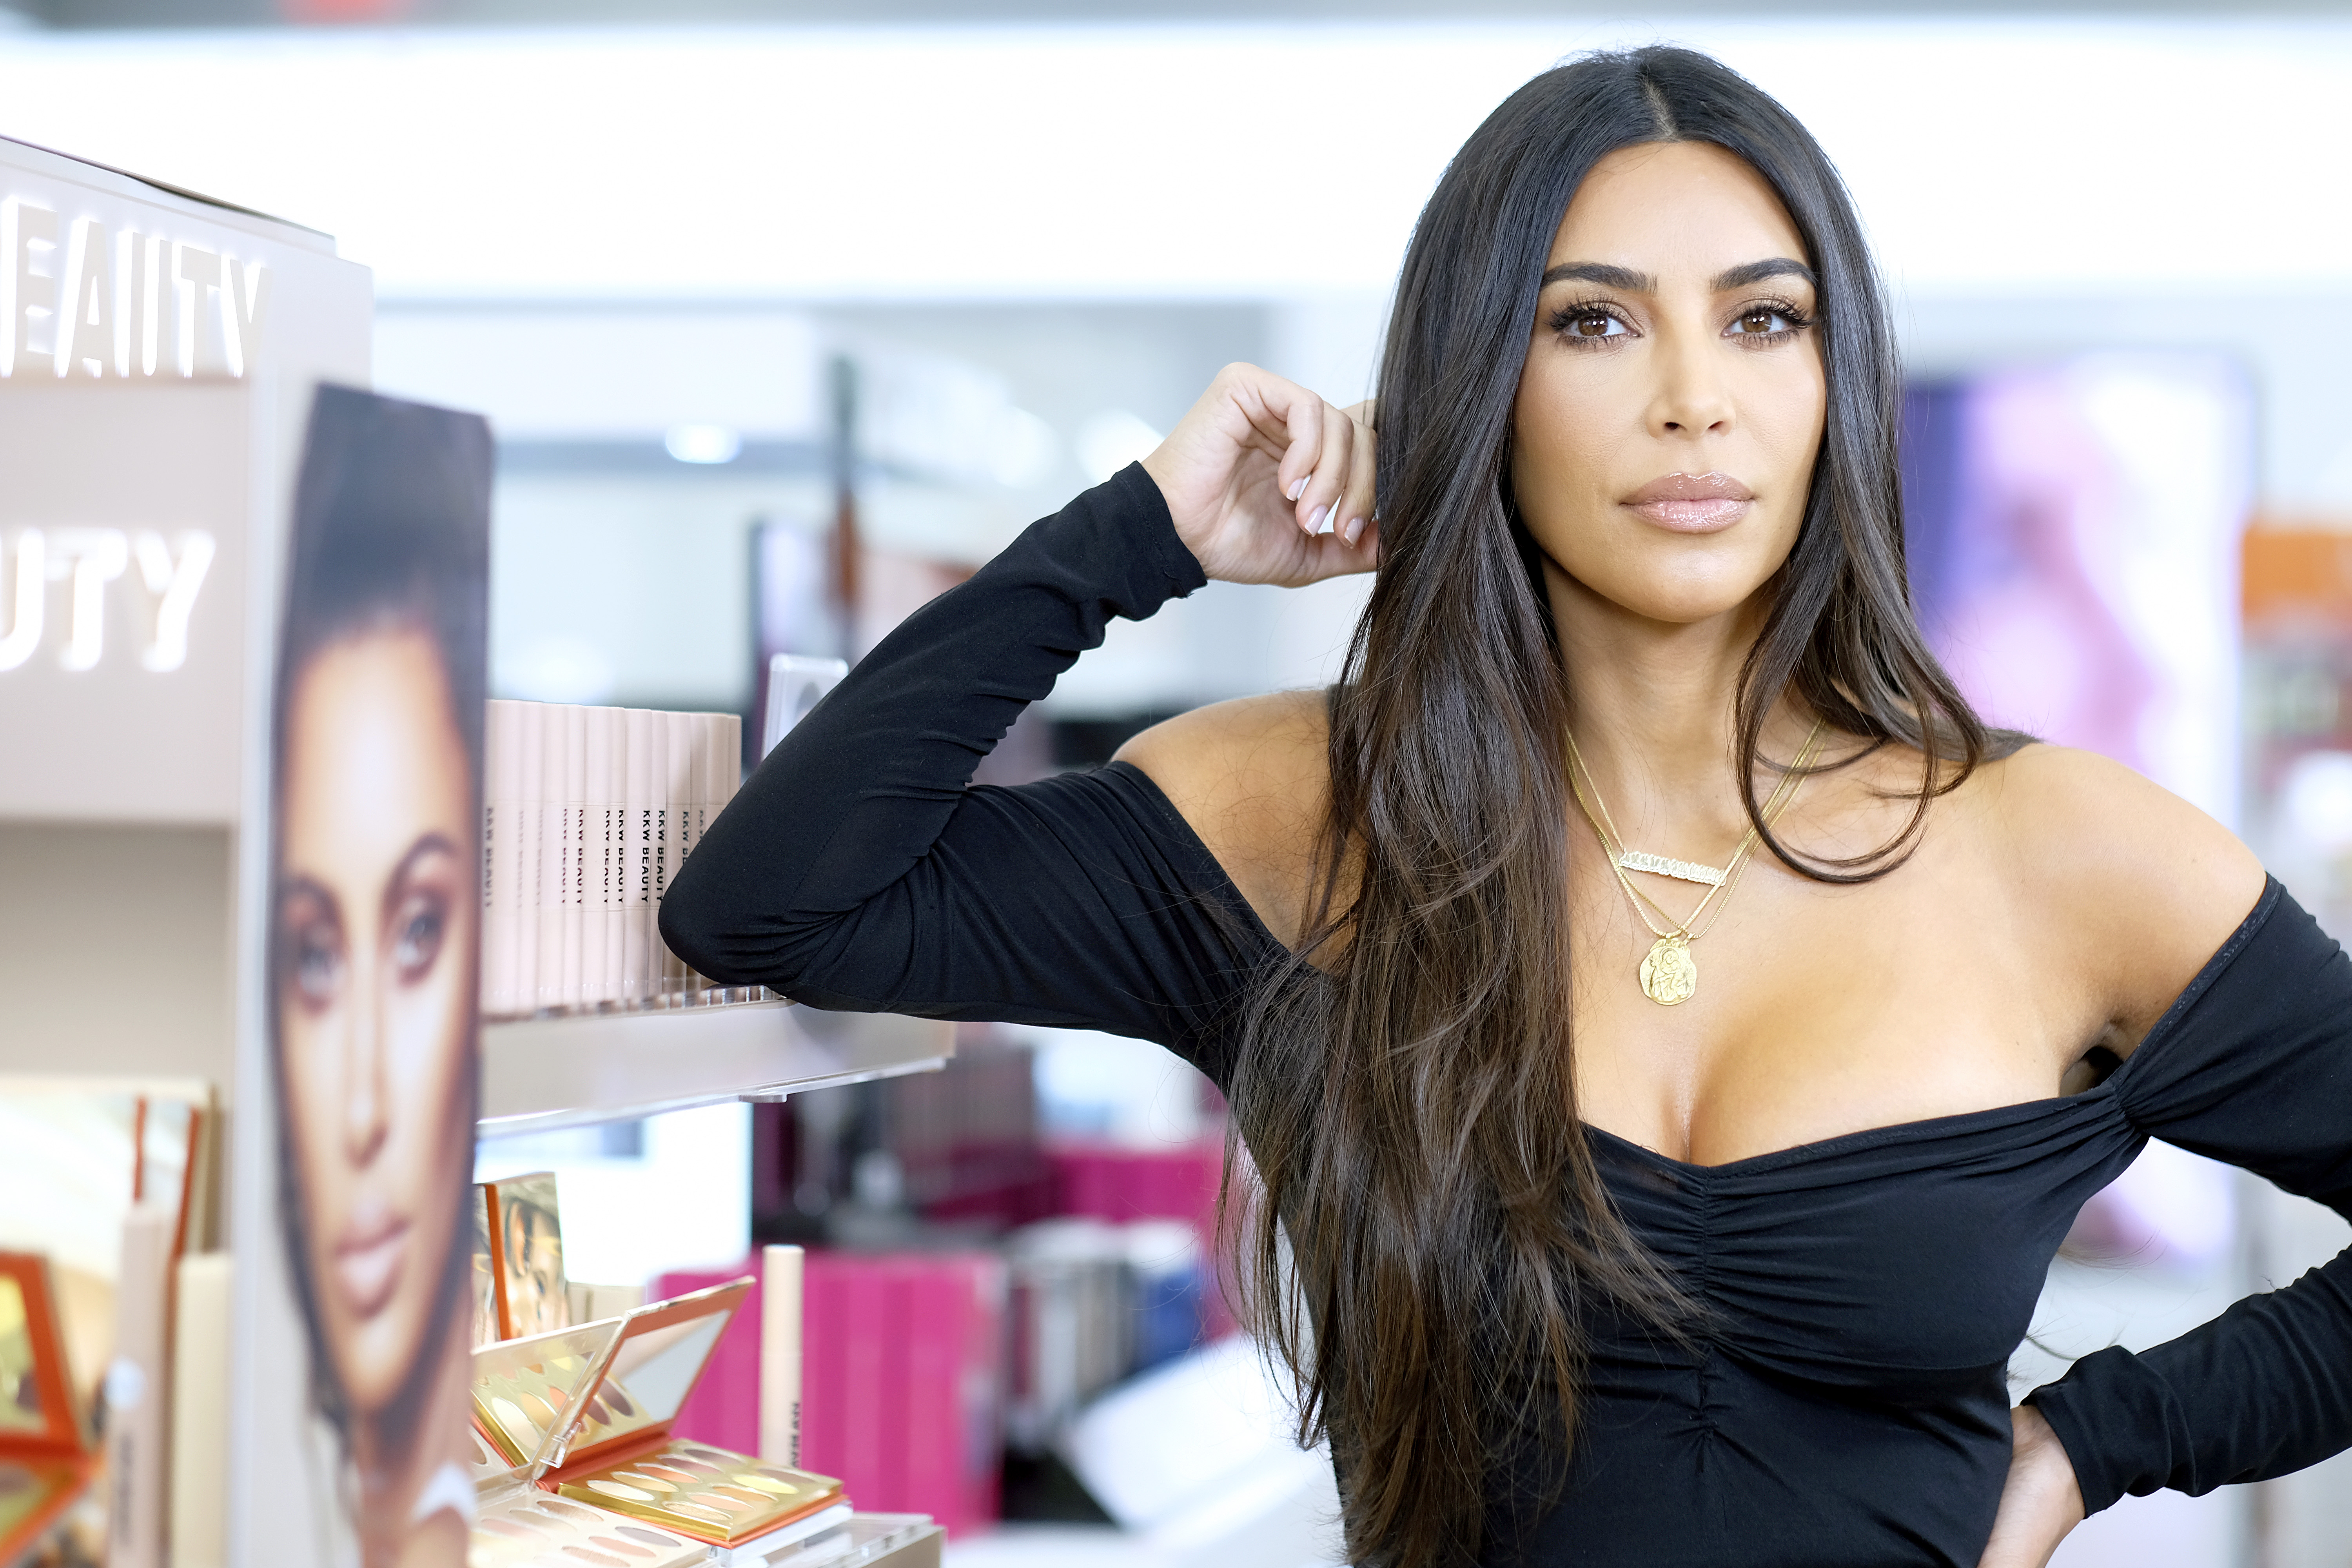 Kim Kardashian Says Co-Parents Should Be Each Other’s “Biggest Cheerleader” Amid Divorce